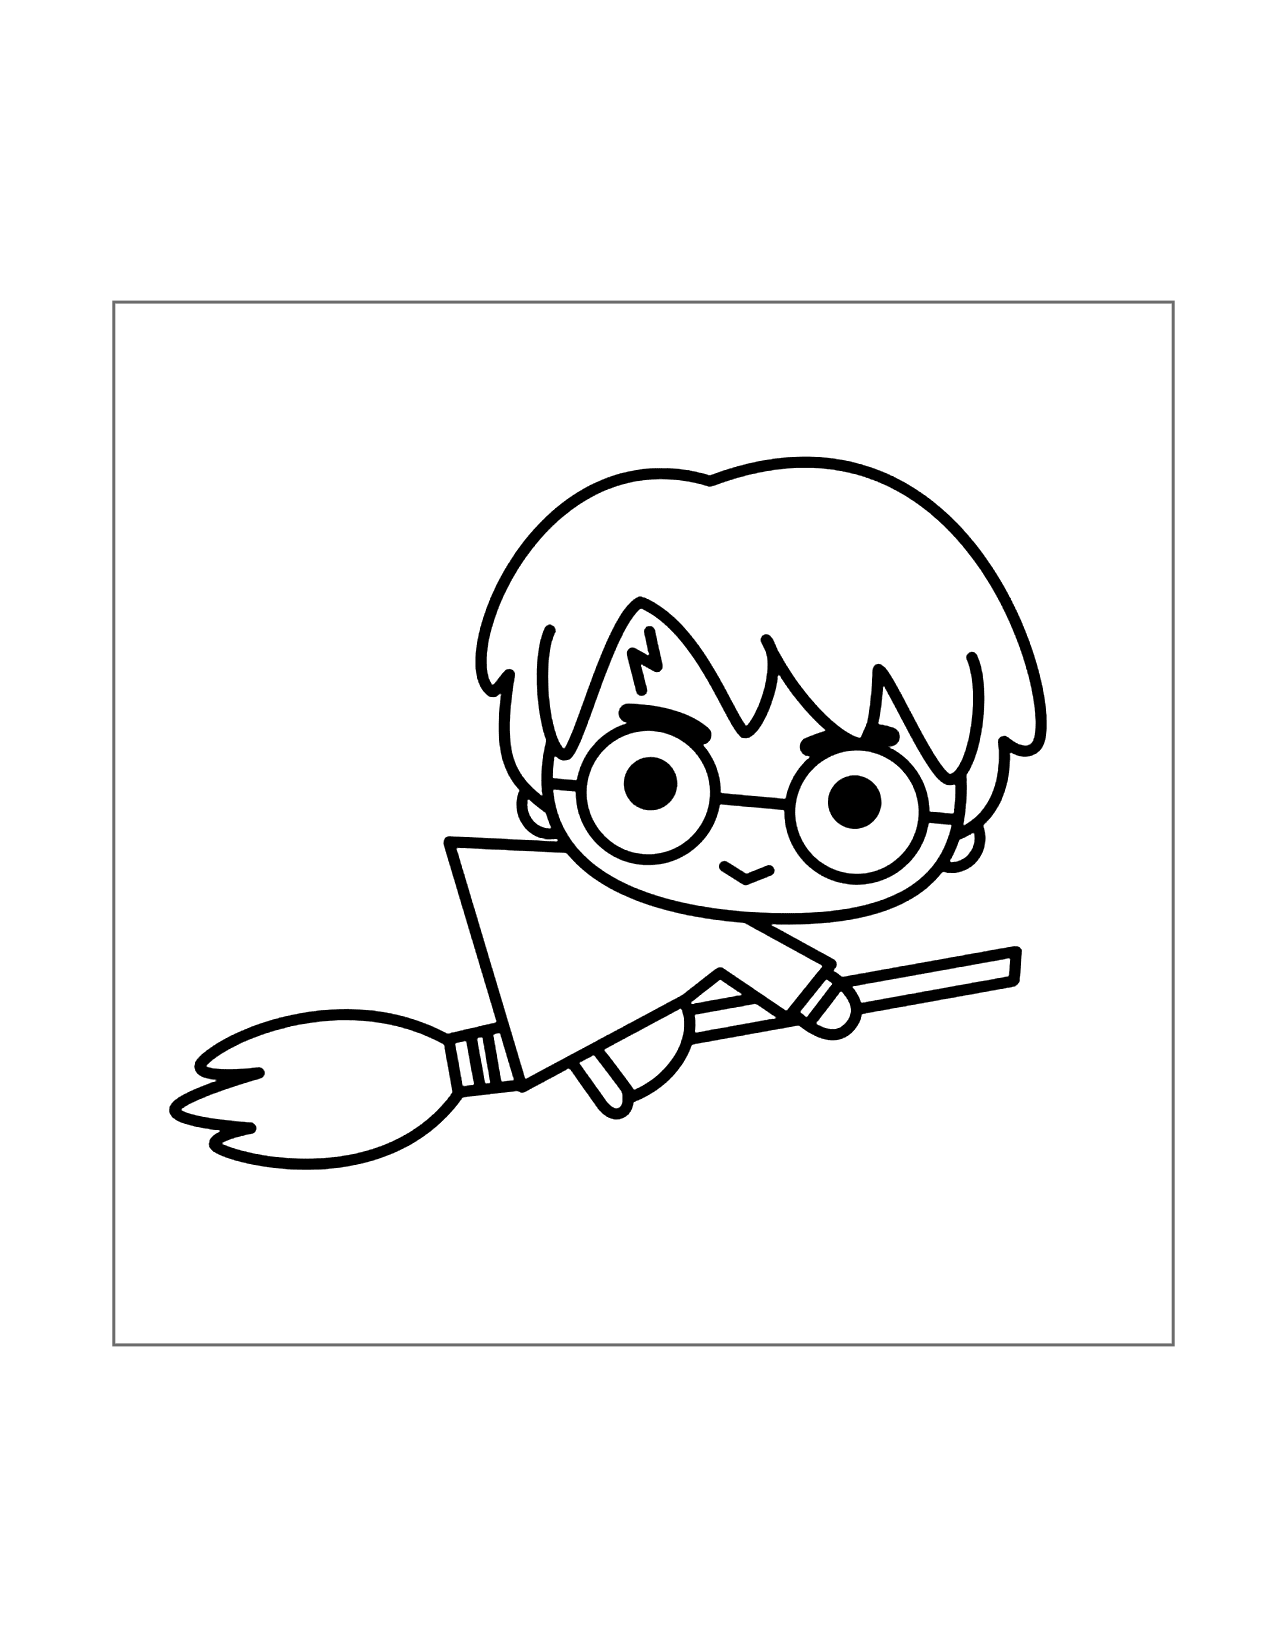 Cute Harry Potter Cartoon Riding Broom Coloring Page